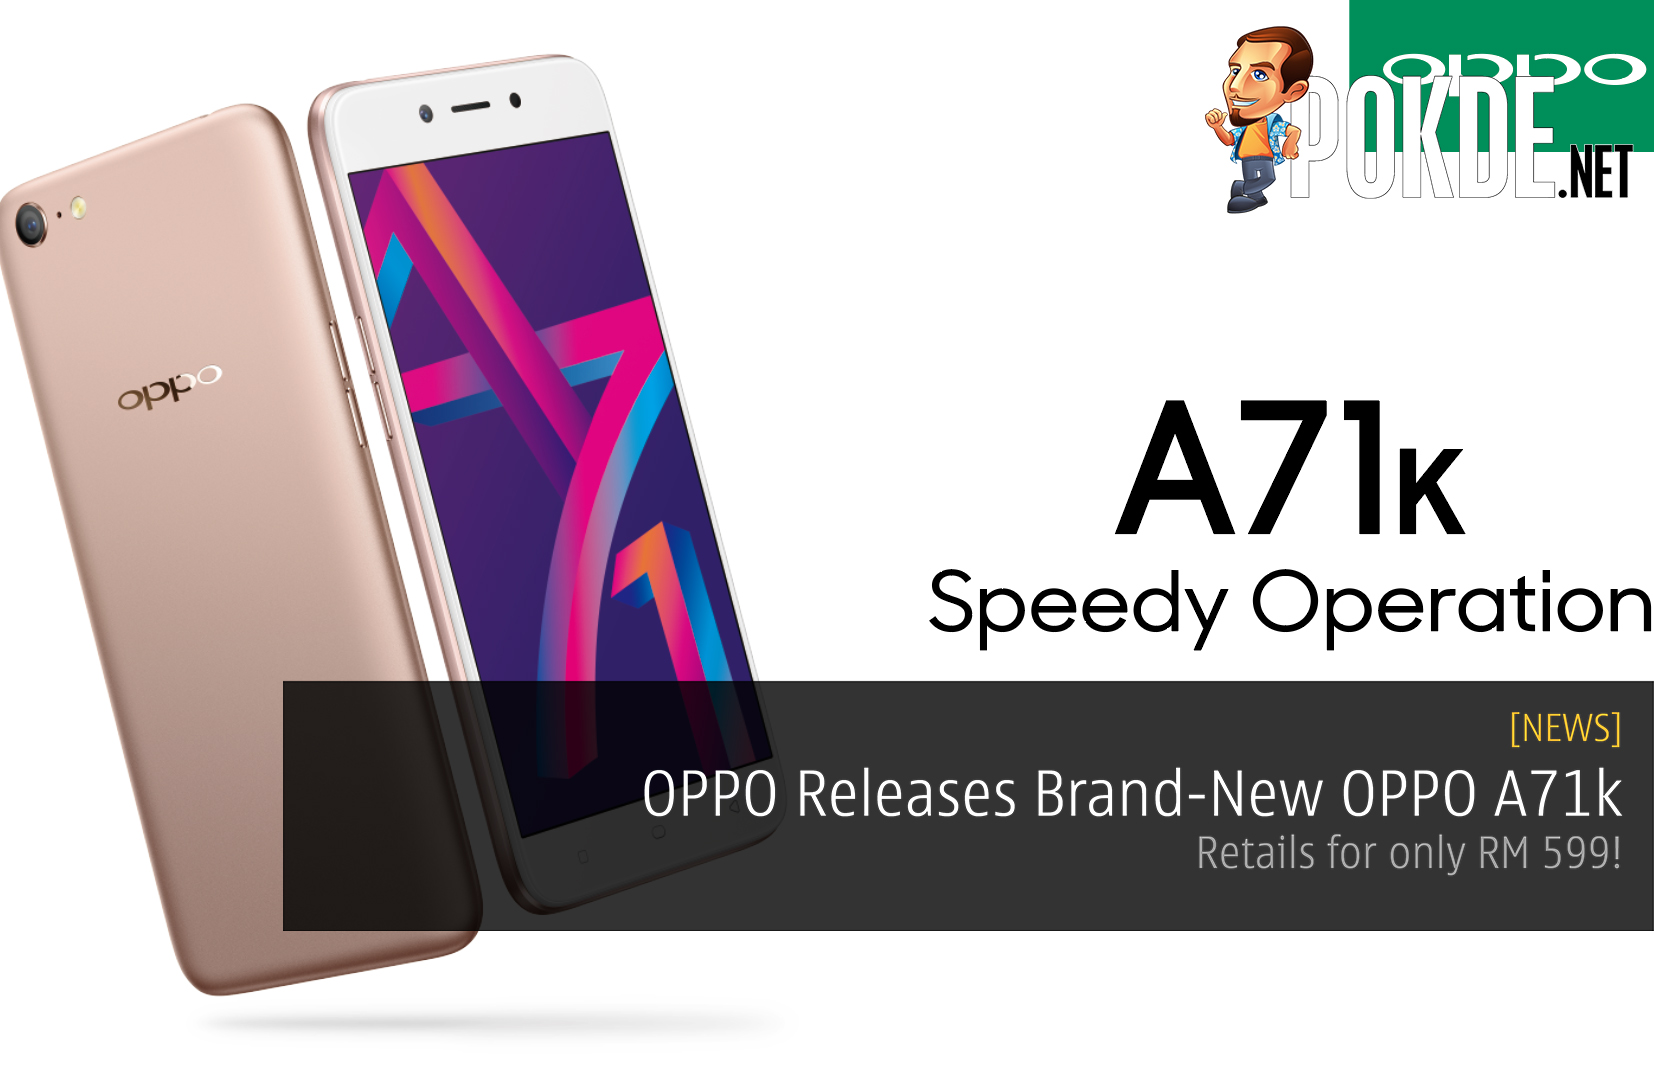 OPPO Releases Brand-New OPPO A71k - Retails for only RM 599! 31